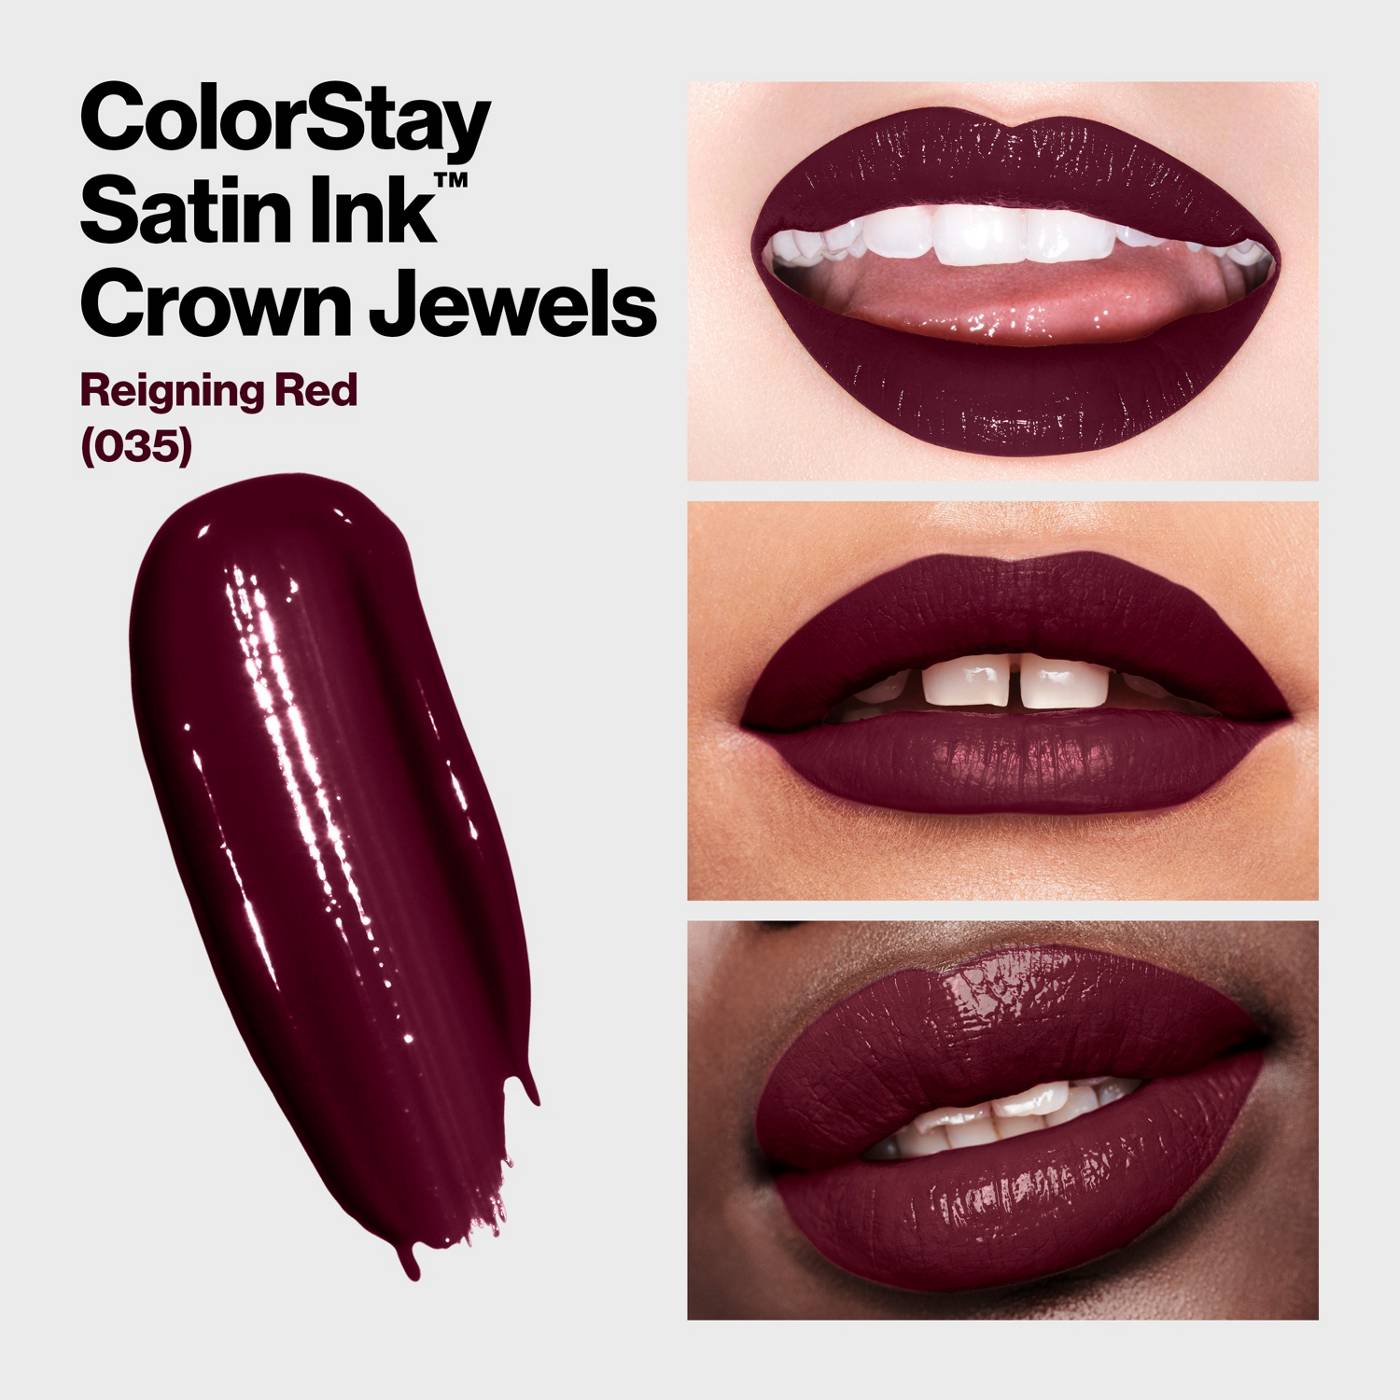 Revlon ColorStay Satin Ink Crown Jewels Liquid Lipstick, Reigning Red; image 3 of 7